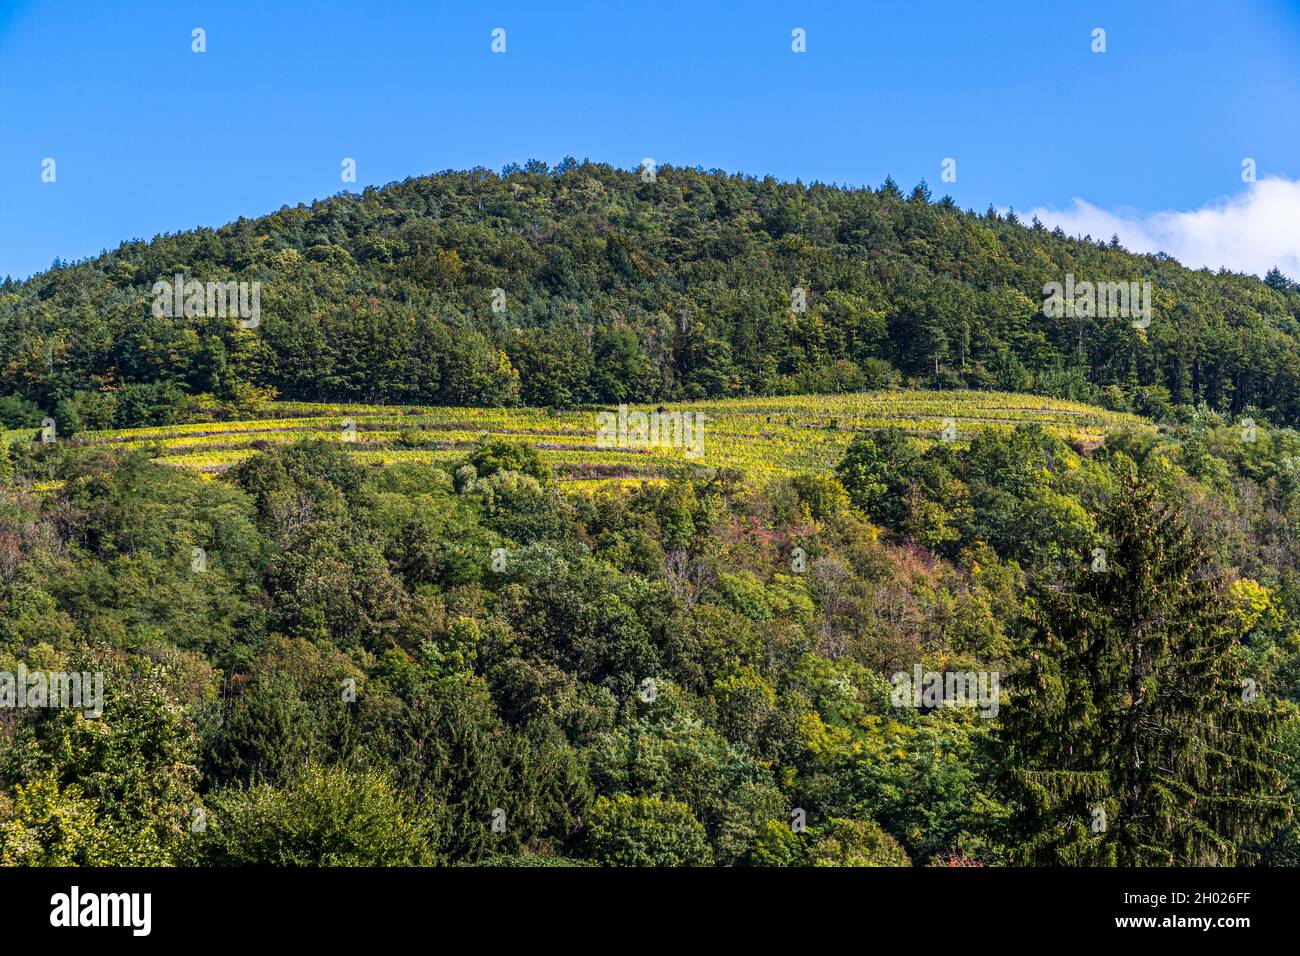 The vineyards of Guebwiller, France Stock Photo